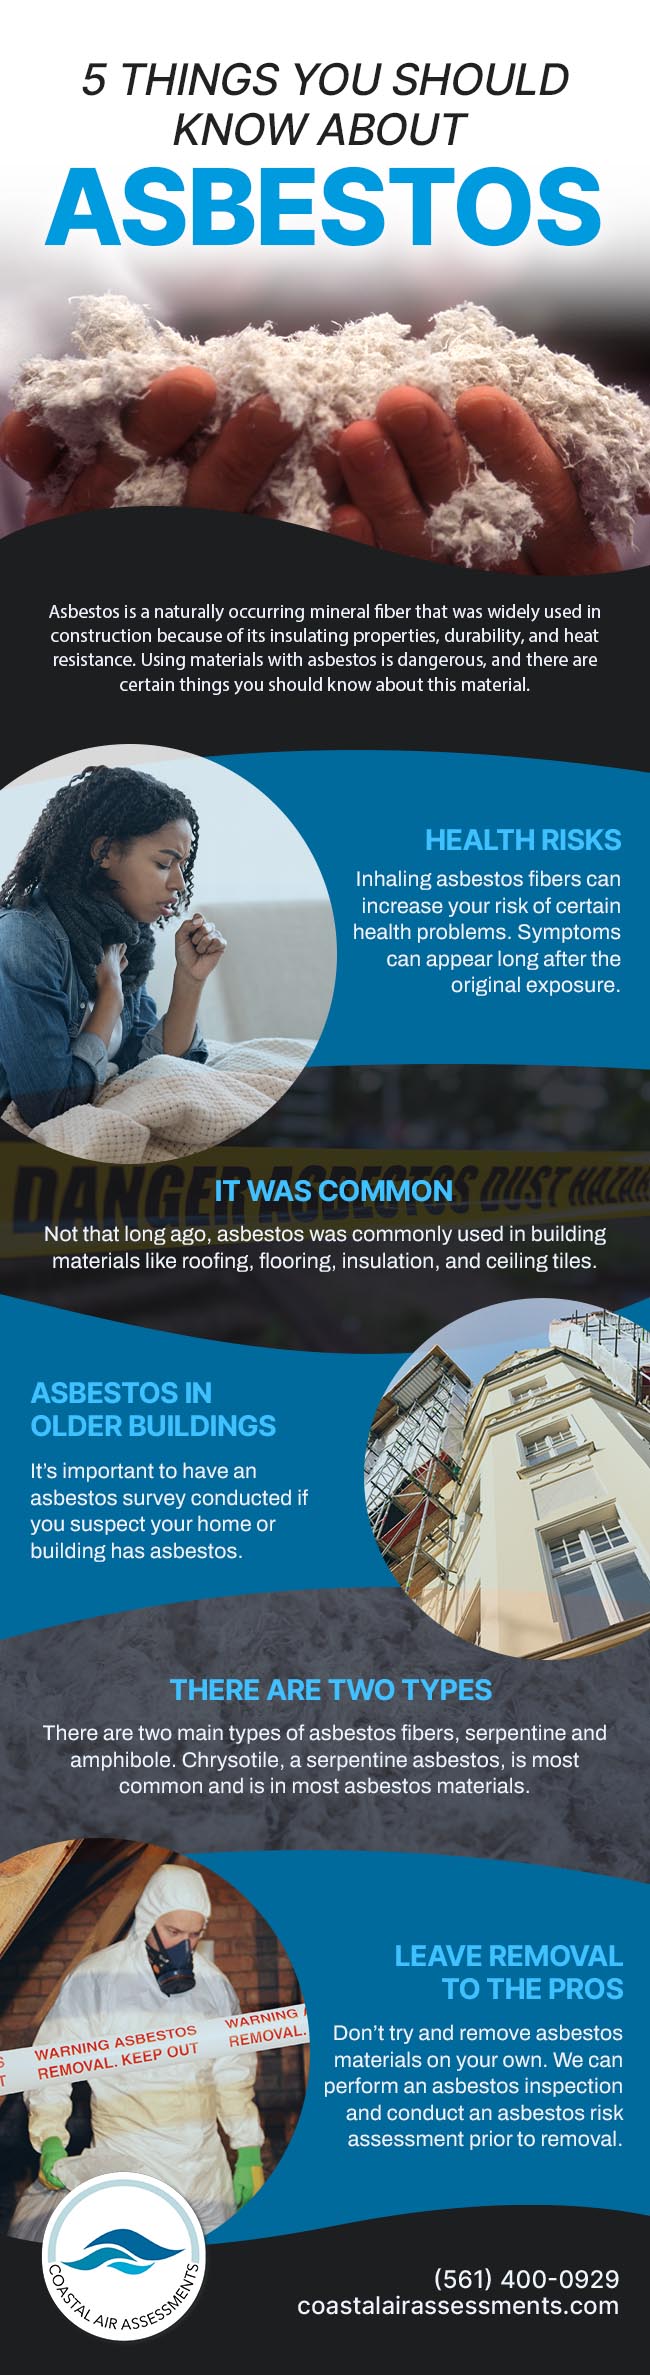 Learn More About the Dangers of Asbestos